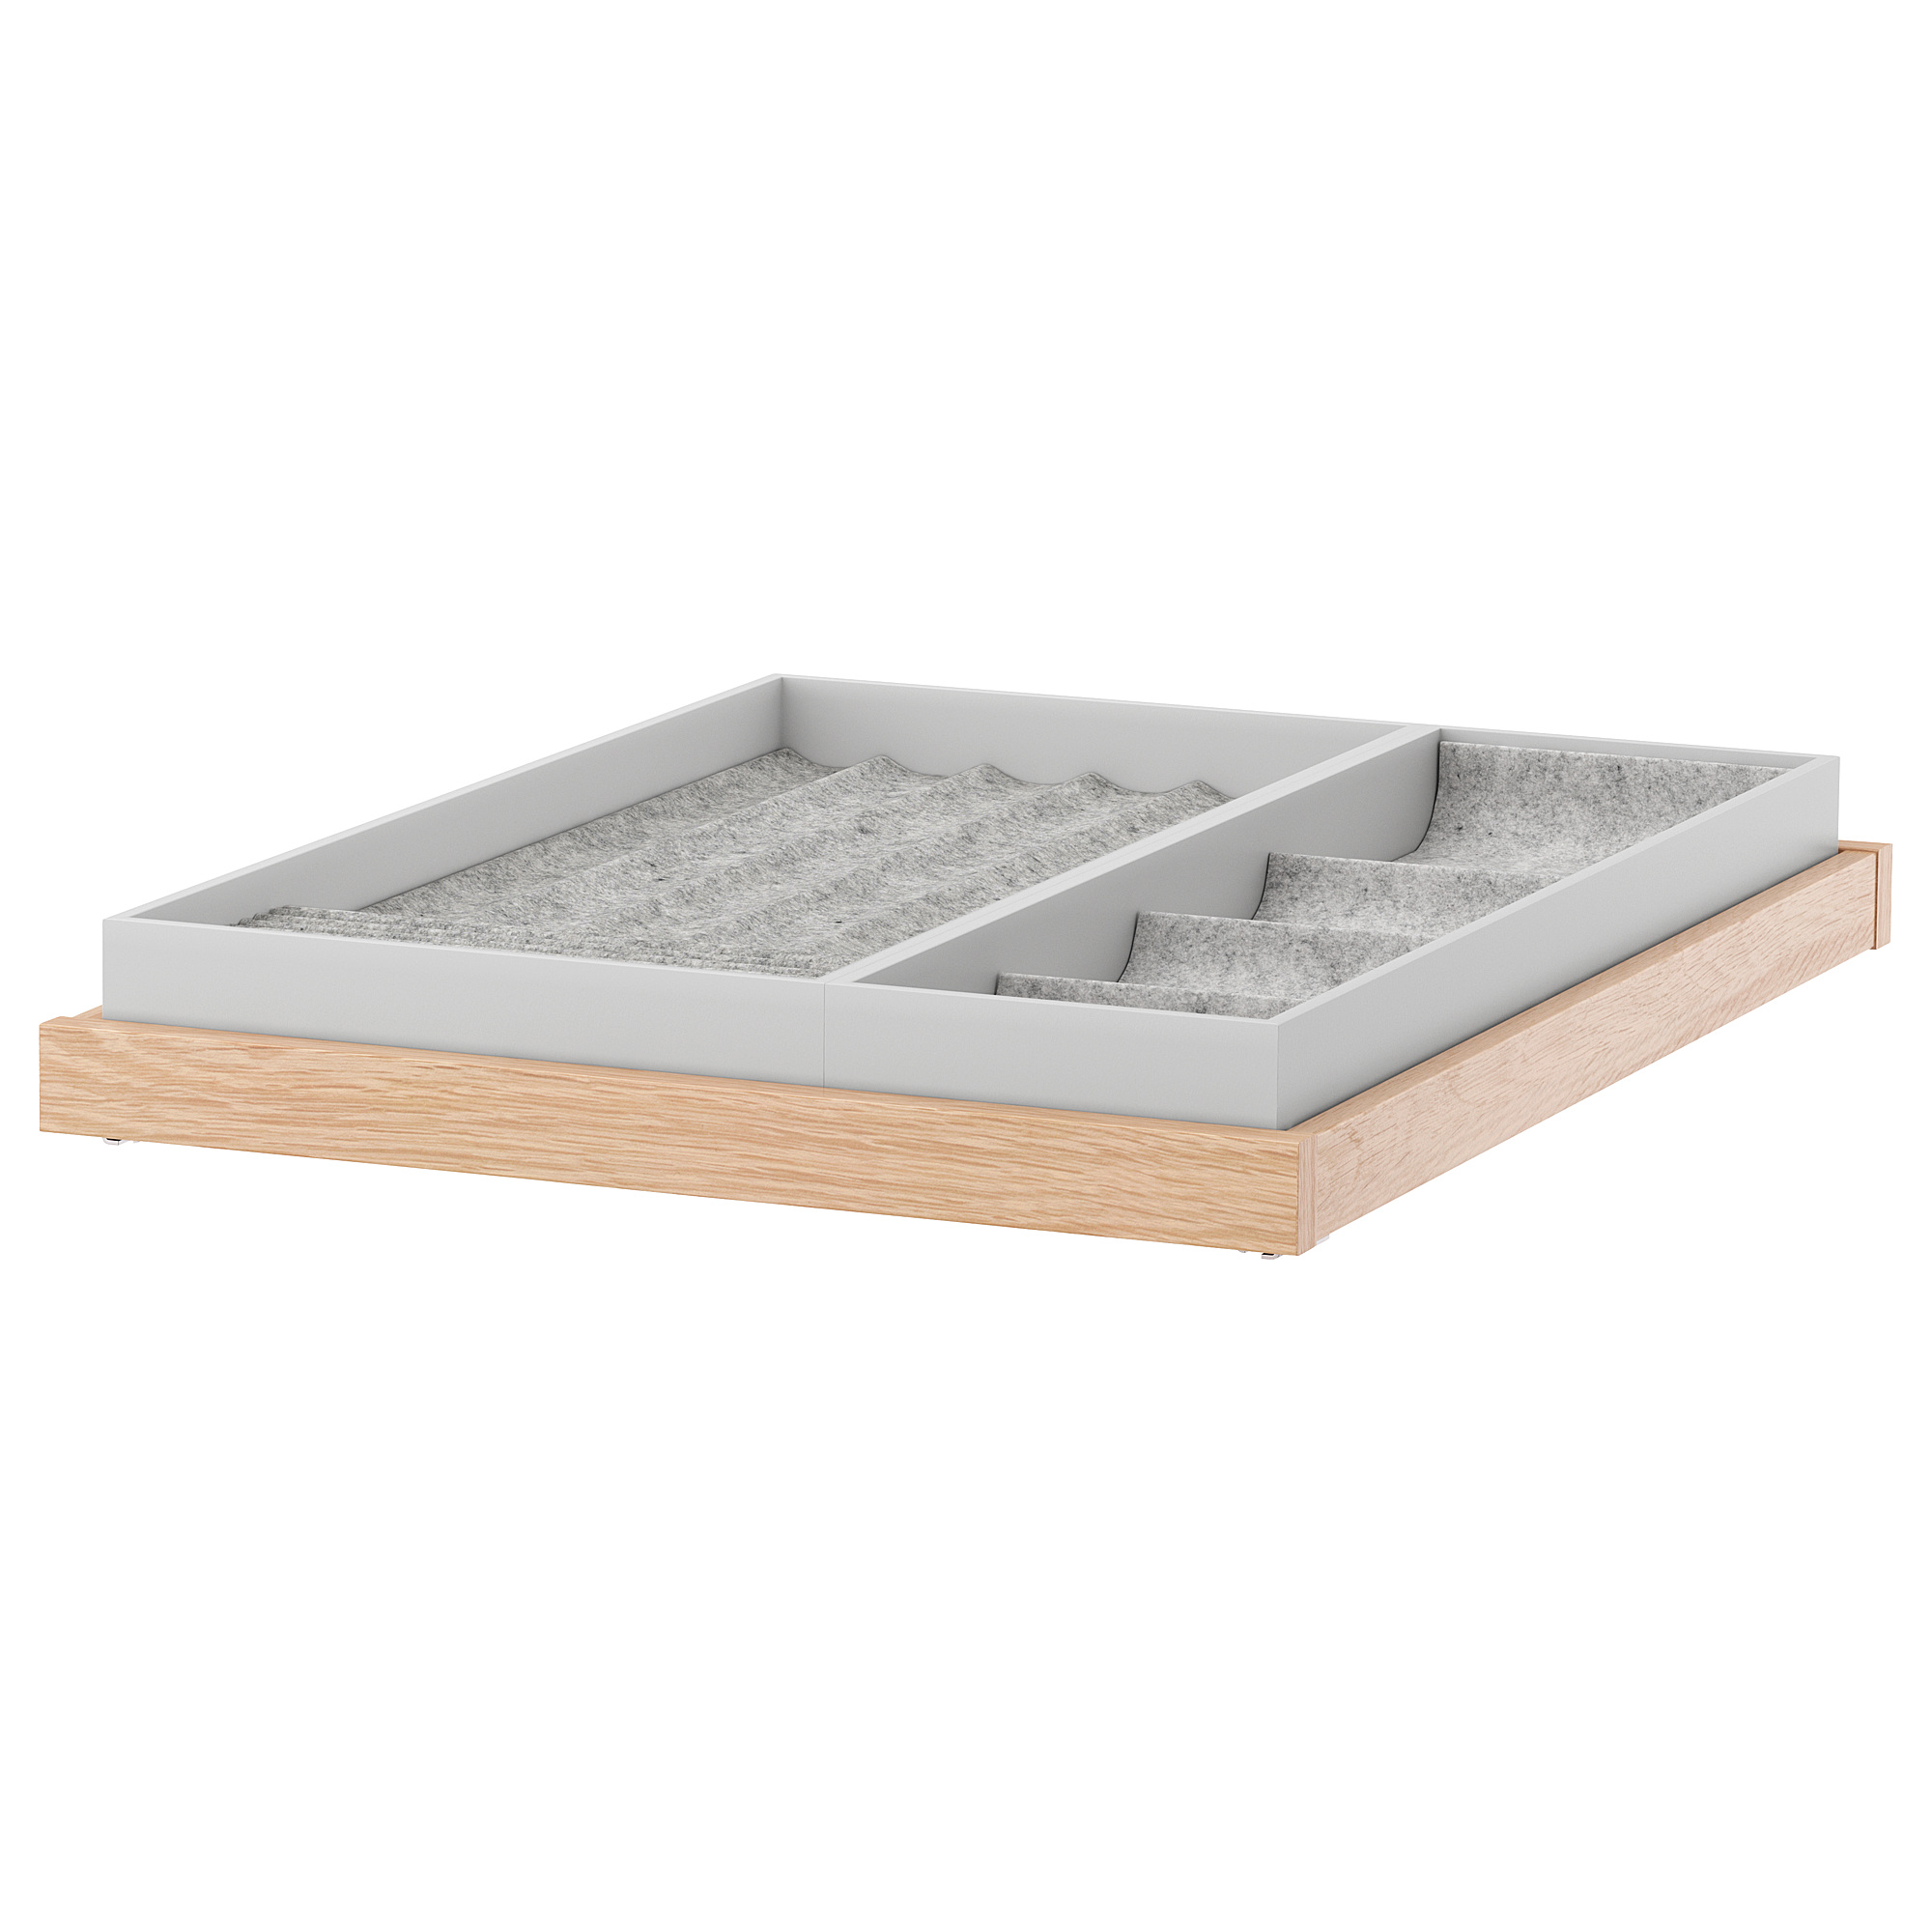 KOMPLEMENT pull-out tray with insert